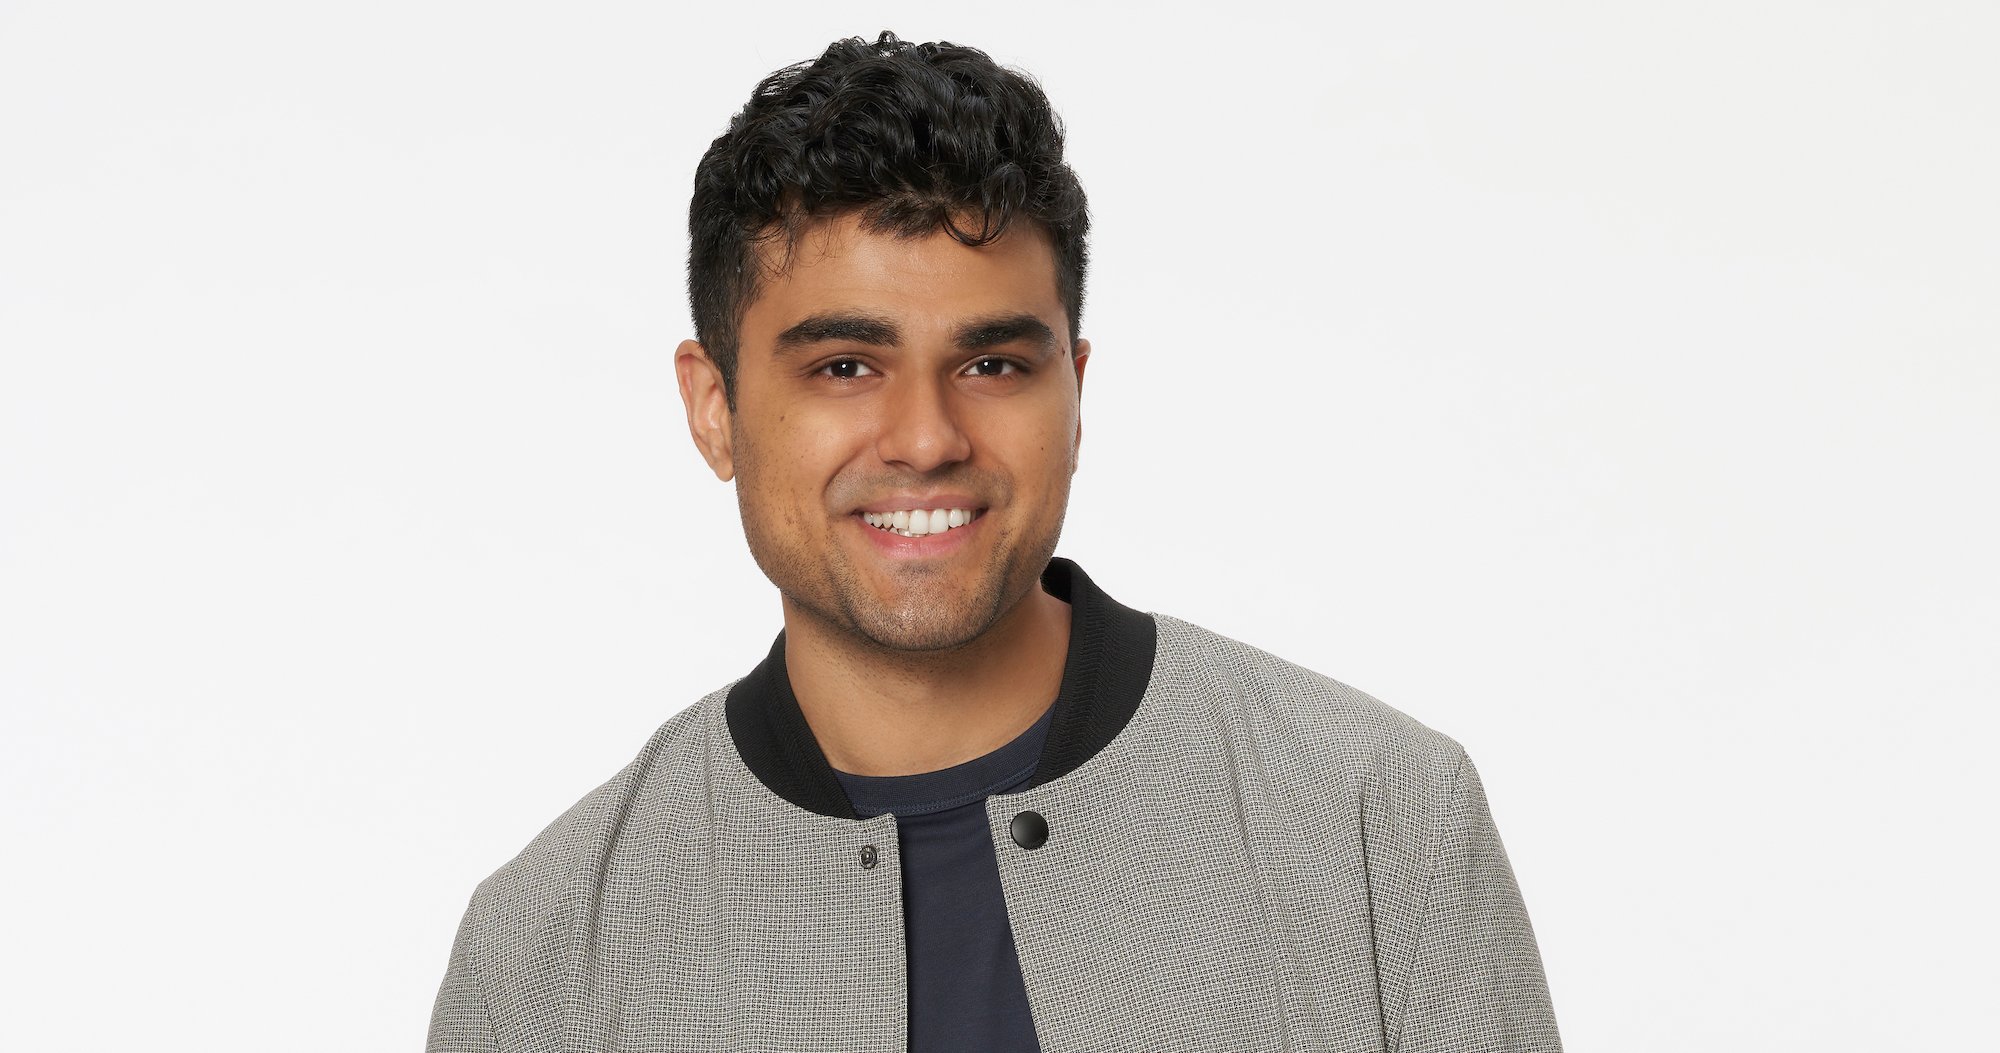 Pardeep in his profile photo for 'The Bachelorette' wearing a gray jacket and black tshirt.